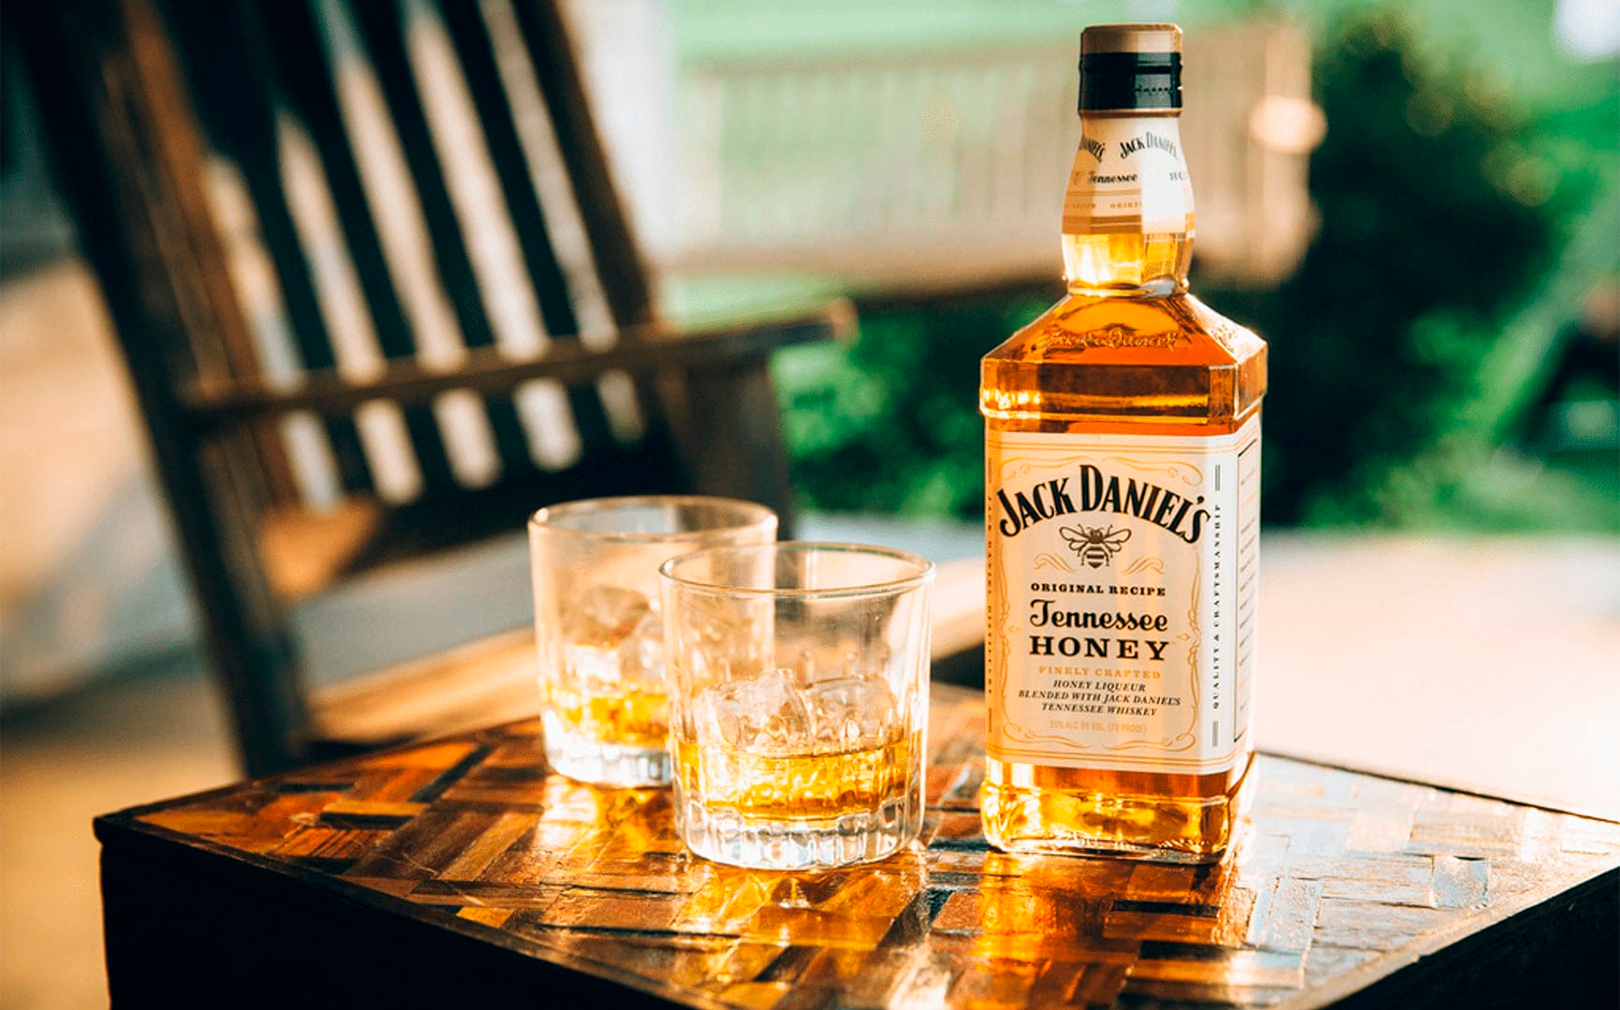 A bottle of Jack Daniel's Honey and two glasses on a table